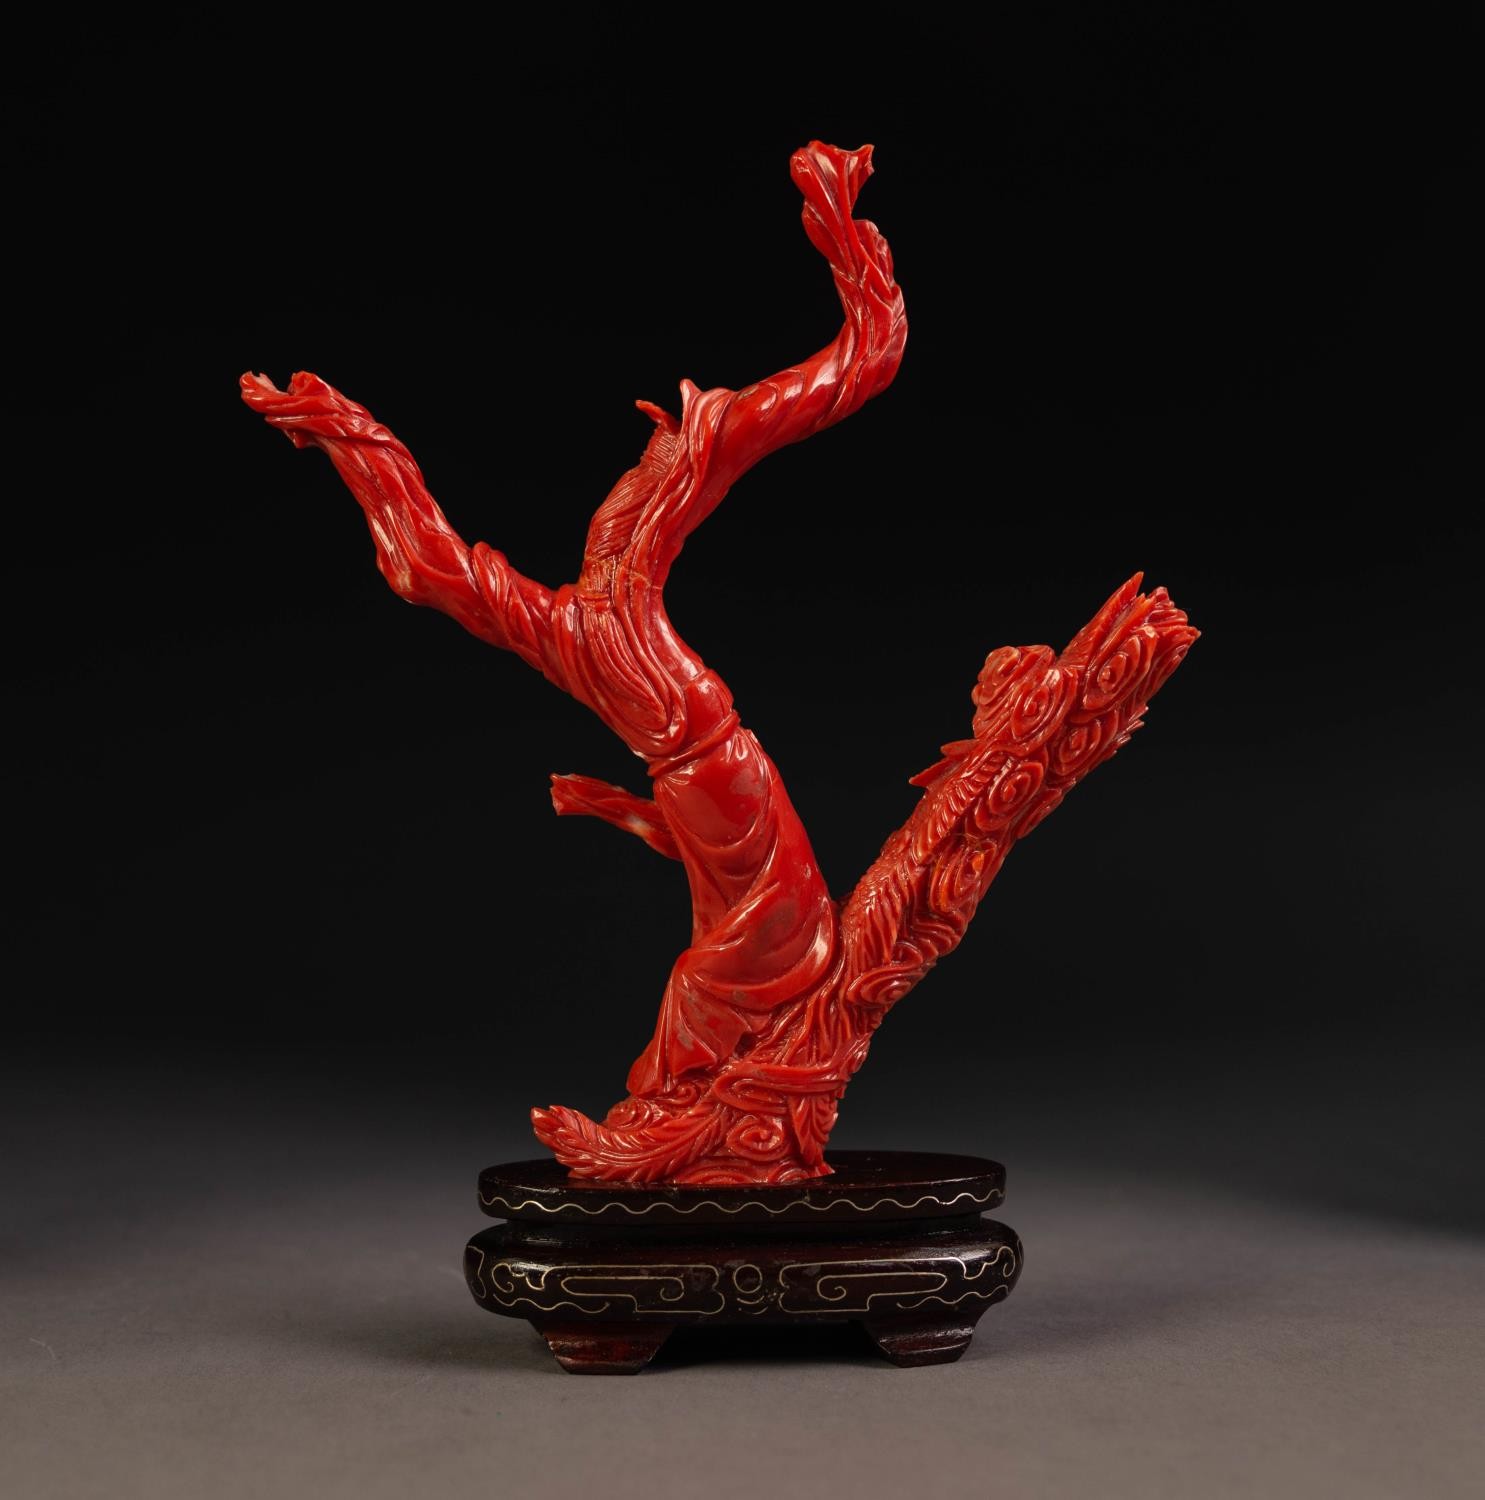 ORIENTAL CARVED RED CORAL DEPICTING A FEMALE FIGURE in flowing robes and a phoenix flying amidst - Image 2 of 3